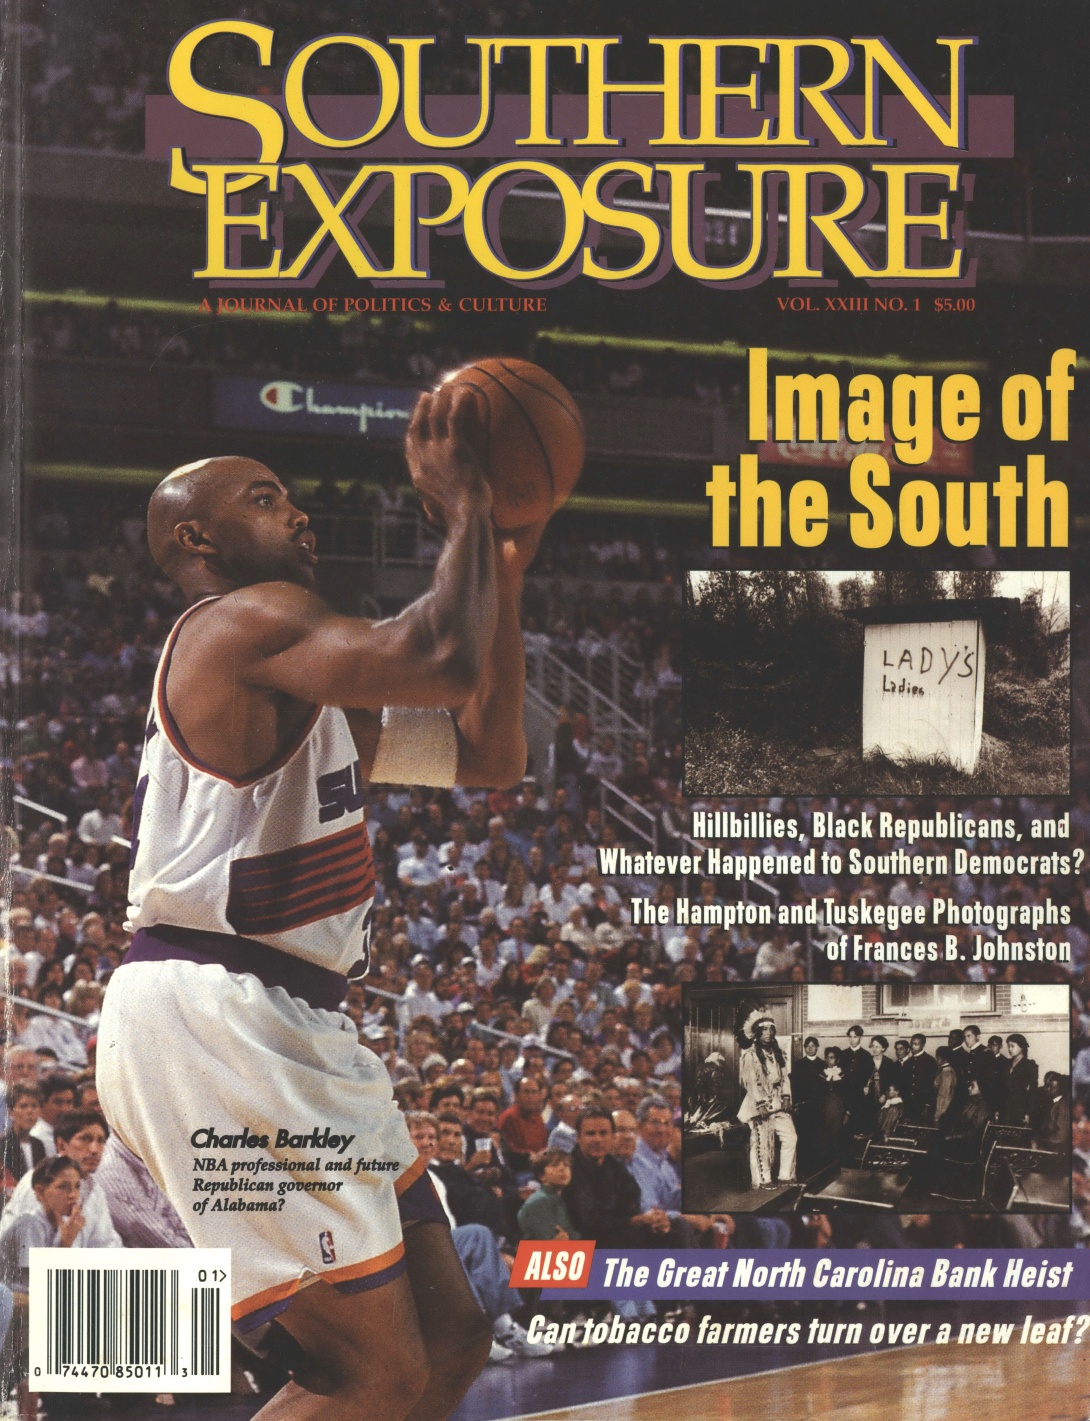 Magazine cover with photo of Charles Barkley shooting the basketball, text reads "Image of the South"